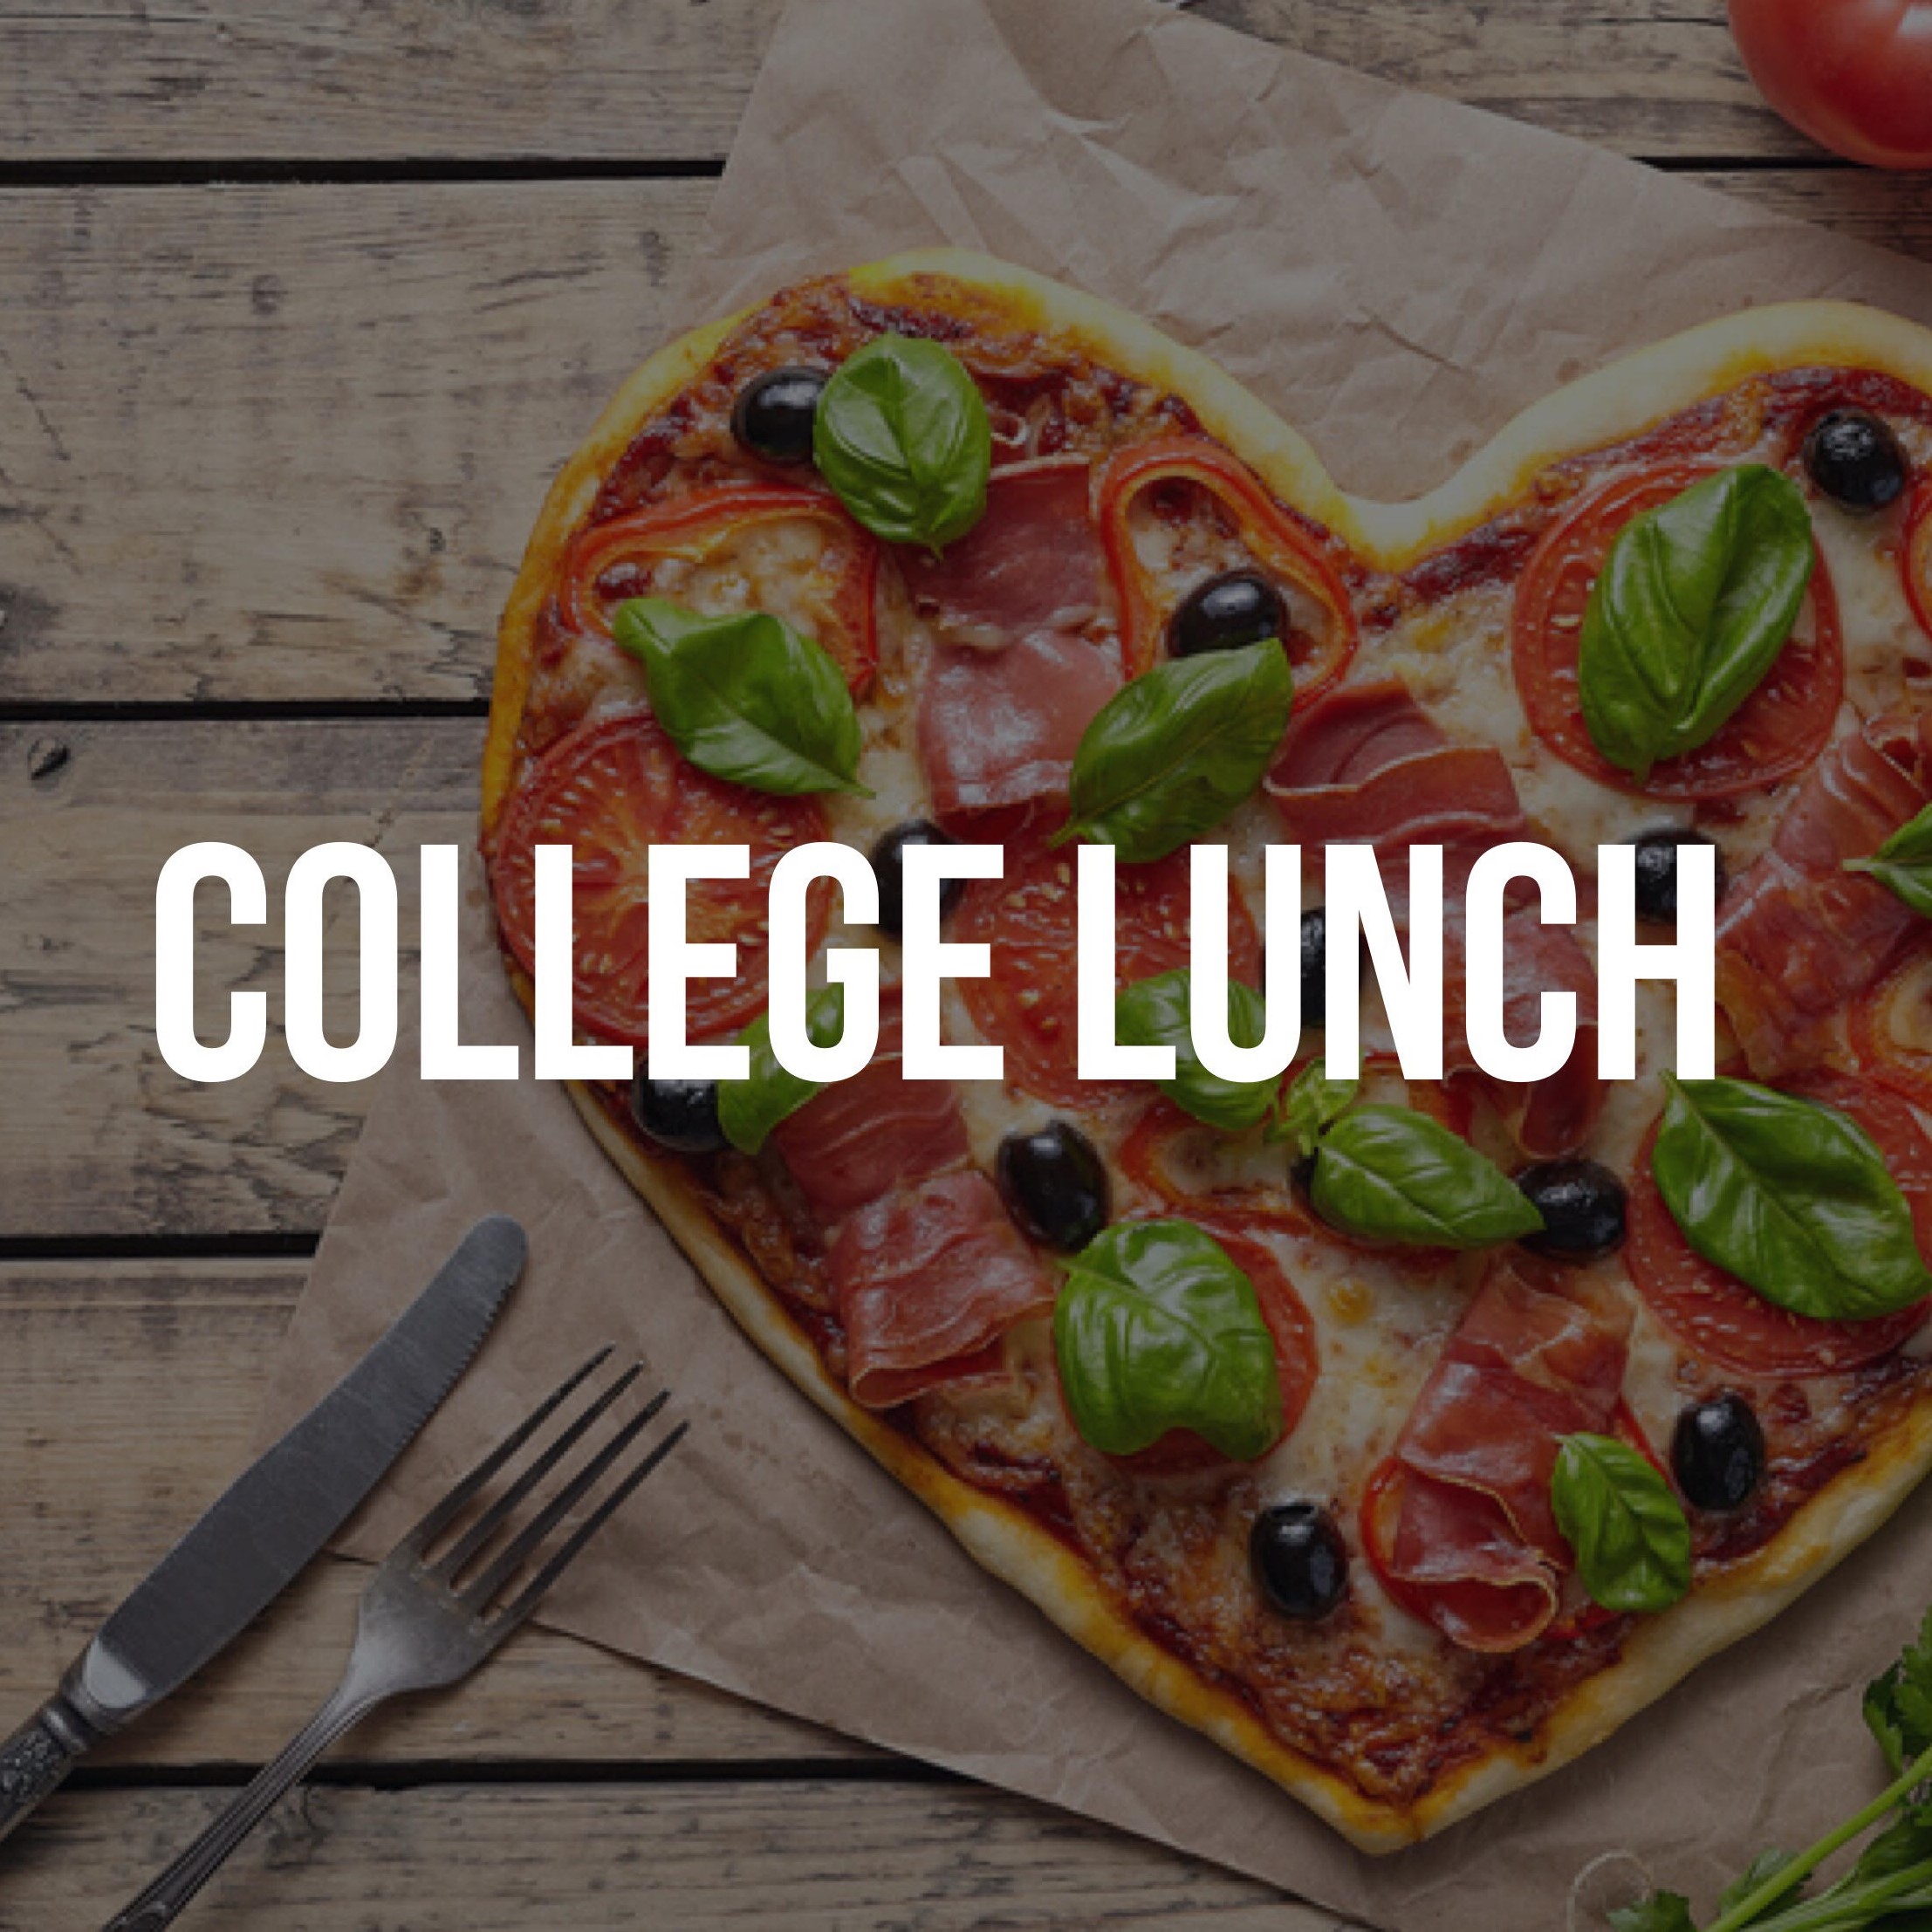 College Lunch image